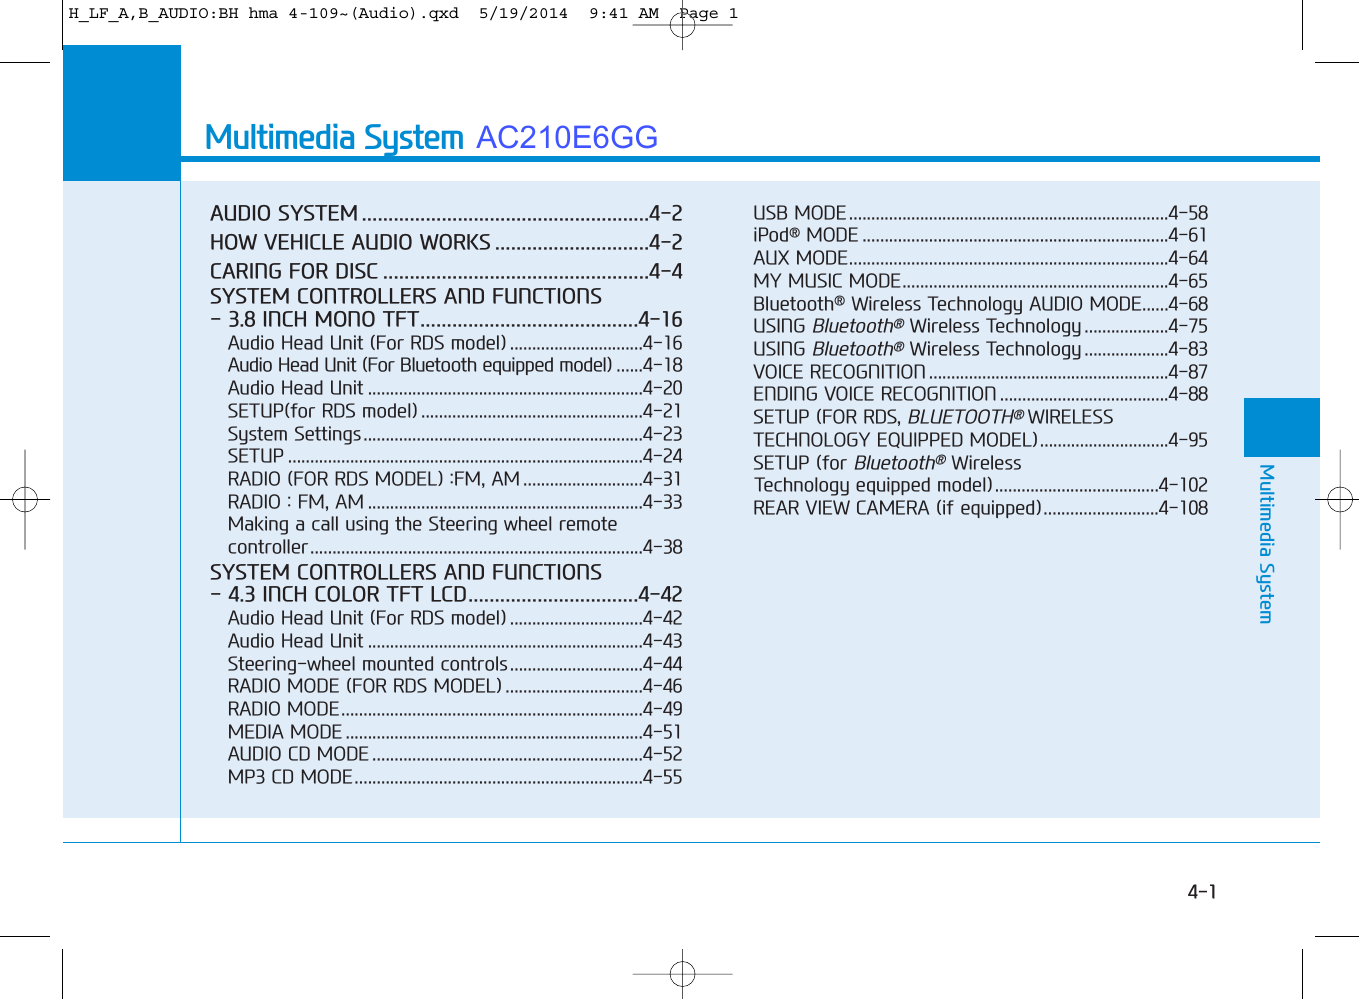 Multimedia SystemAUDIO SYSTEM ......................................................4-2HOW VEHICLE AUDIO WORKS .............................4-2CARING FOR DISC ..................................................4-4SYSTEM CONTROLLERS AND FUNCTIONS- 3.8 INCH MONO TFT.........................................4-16Audio Head Unit (For RDS model) ..............................4-16Audio Head Unit (For Bluetooth equipped model) ......4-18Audio Head Unit ..............................................................4-20SETUP(for RDS model) ..................................................4-21System Settings...............................................................4-23SETUP ................................................................................4-24RADIO (FOR RDS MODEL) :FM, AM ...........................4-31RADIO : FM, AM ..............................................................4-33Making a call using the Steering wheel remotecontroller...........................................................................4-38SYSTEM CONTROLLERS AND FUNCTIONS- 4.3 INCH COLOR TFT LCD................................4-42Audio Head Unit (For RDS model) ..............................4-42Audio Head Unit ..............................................................4-43Steering-wheel mounted controls..............................4-44RADIO MODE (FOR RDS MODEL) ...............................4-46RADIO MODE....................................................................4-49MEDIA MODE ...................................................................4-51AUDIO CD MODE .............................................................4-52MP3 CD MODE.................................................................4-55USB MODE........................................................................4-58iPod®MODE .....................................................................4-61AUX MODE........................................................................4-64MY MUSIC MODE............................................................4-65Bluetooth®Wireless Technology AUDIO MODE......4-68USING Bluetooth®Wireless Technology ...................4-75USING Bluetooth®Wireless Technology ...................4-83VOICE RECOGNITION ......................................................4-87 ENDING VOICE RECOGNITION ......................................4-88SETUP (FOR RDS, BLUETOOTH®WIRELESSTECHNOLOGY EQUIPPED MODEL).............................4-95SETUP (for Bluetooth®Wireless Technology equipped model).....................................4-102REAR VIEW CAMERA (if equipped)..........................4-10844Multimedia System4-1H_LF_A,B_AUDIO:BH hma 4-109~(Audio).qxd  5/19/2014  9:41 AM  Page 1AC210E6GG